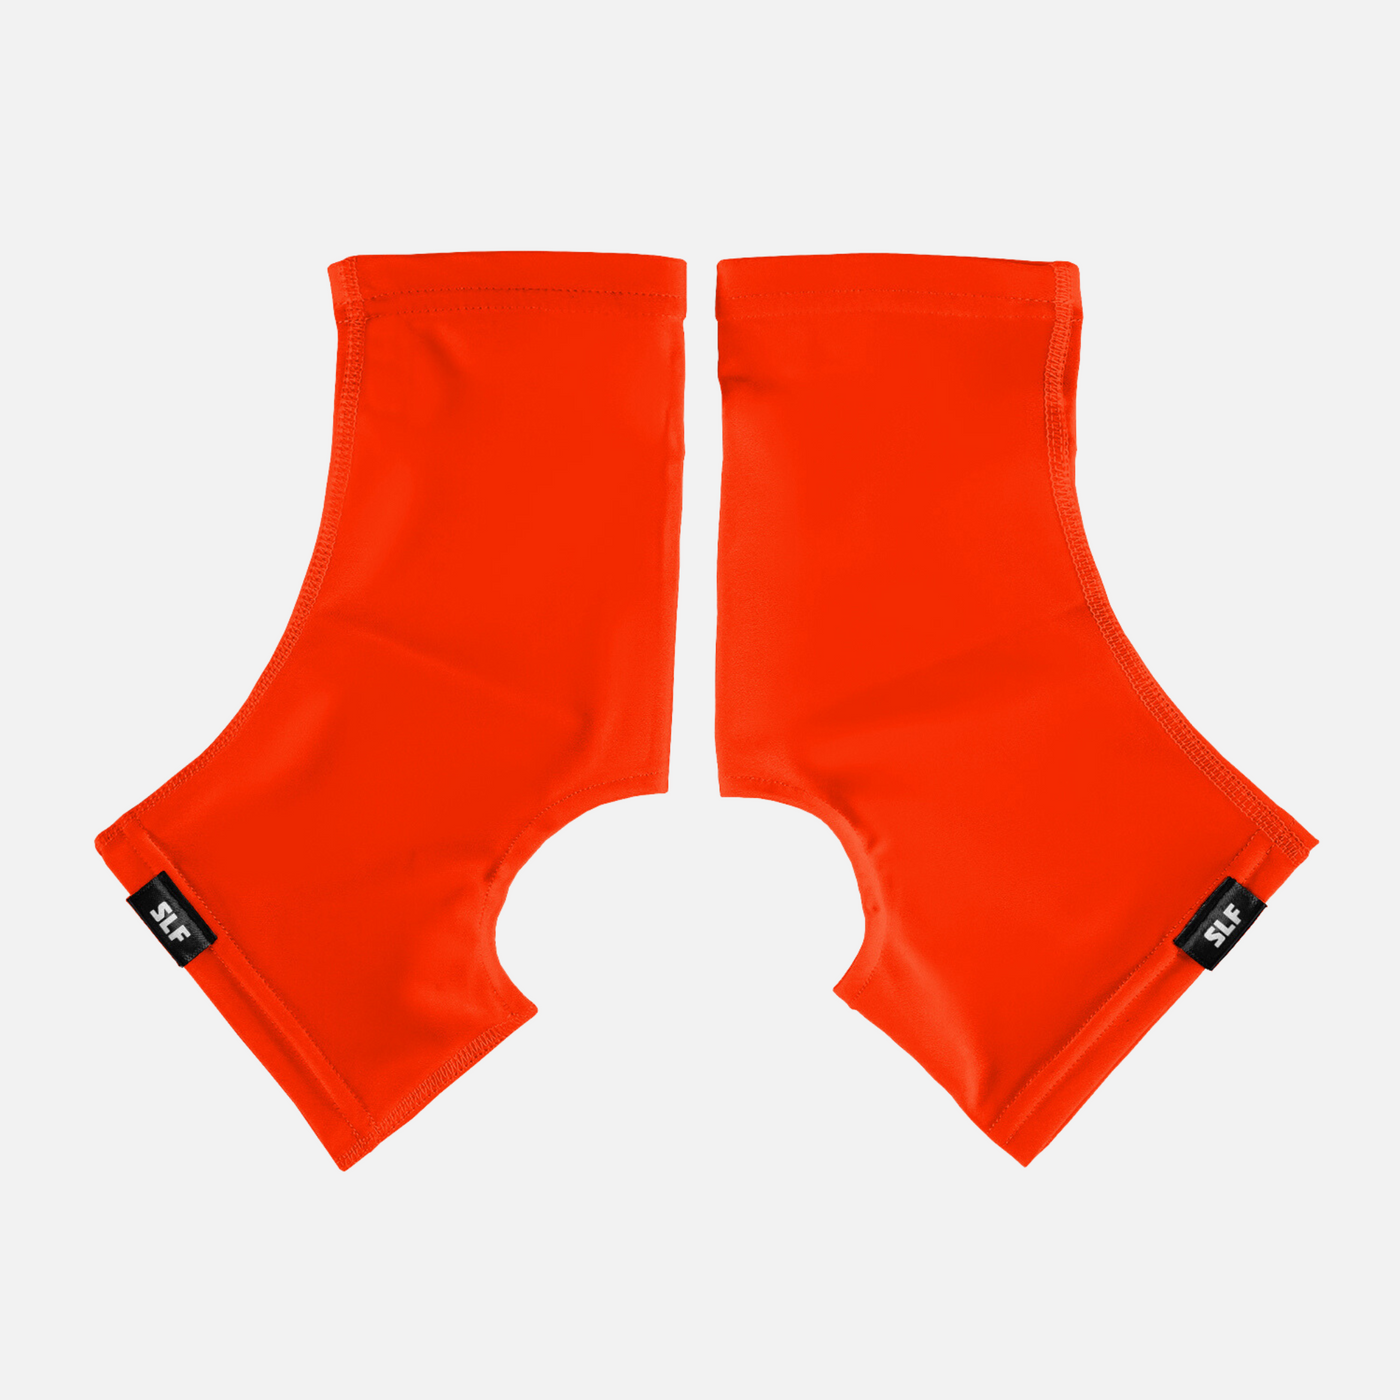 Hue Orange Spats / Cleat Covers